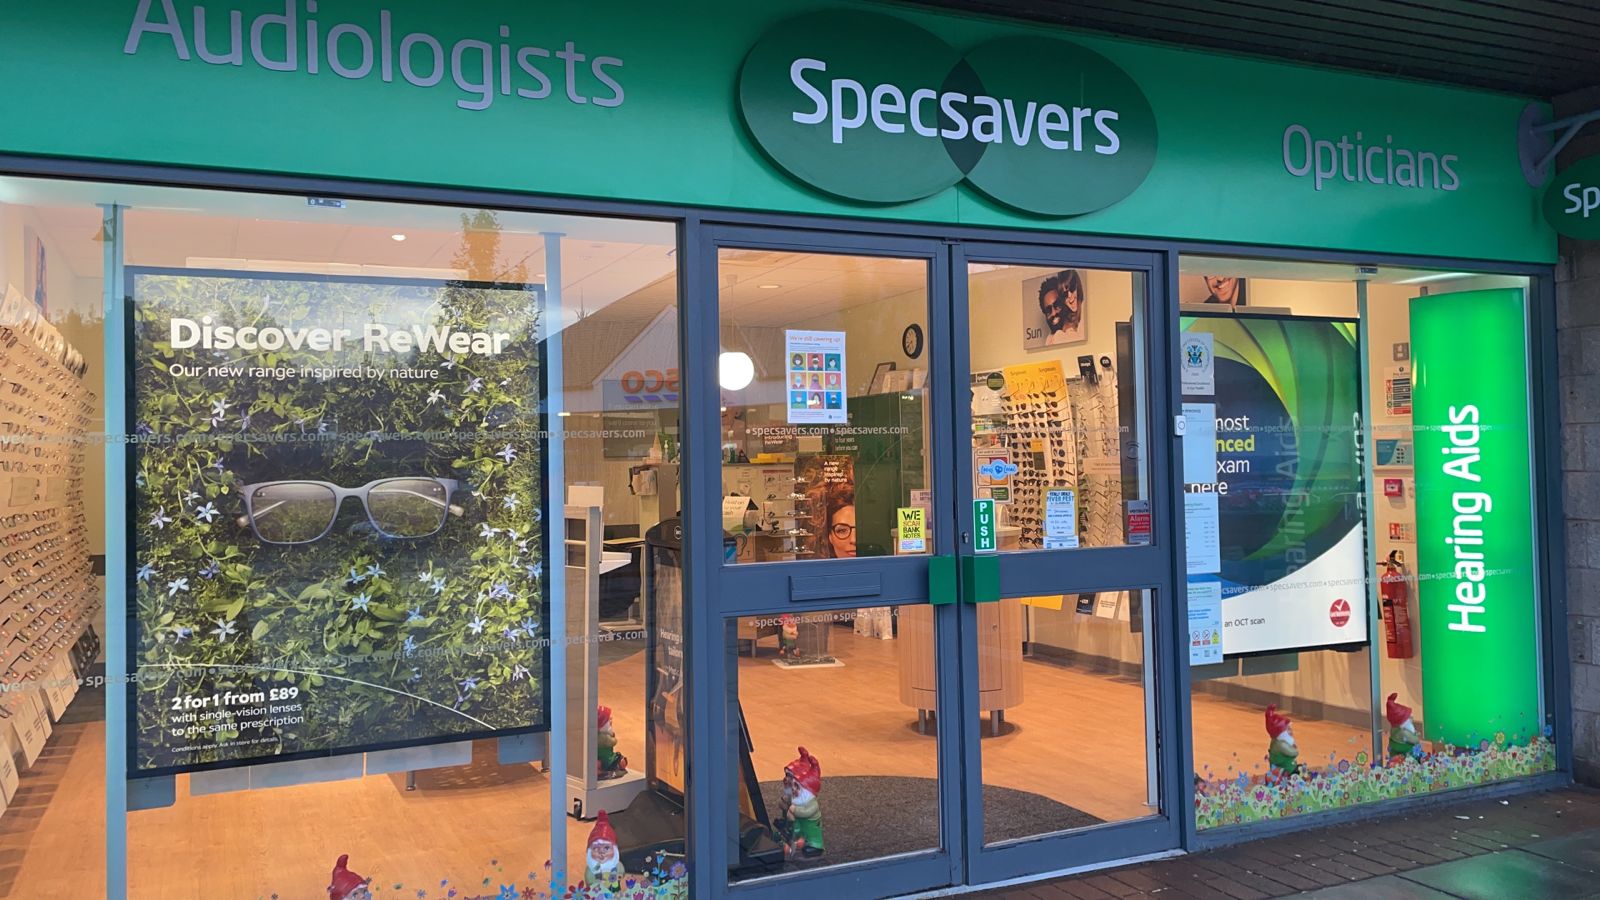 Specsavers Linlithgow store - exterior Specsavers Opticians and Audiologists - Linlithgow Linlithgow 01506 534484